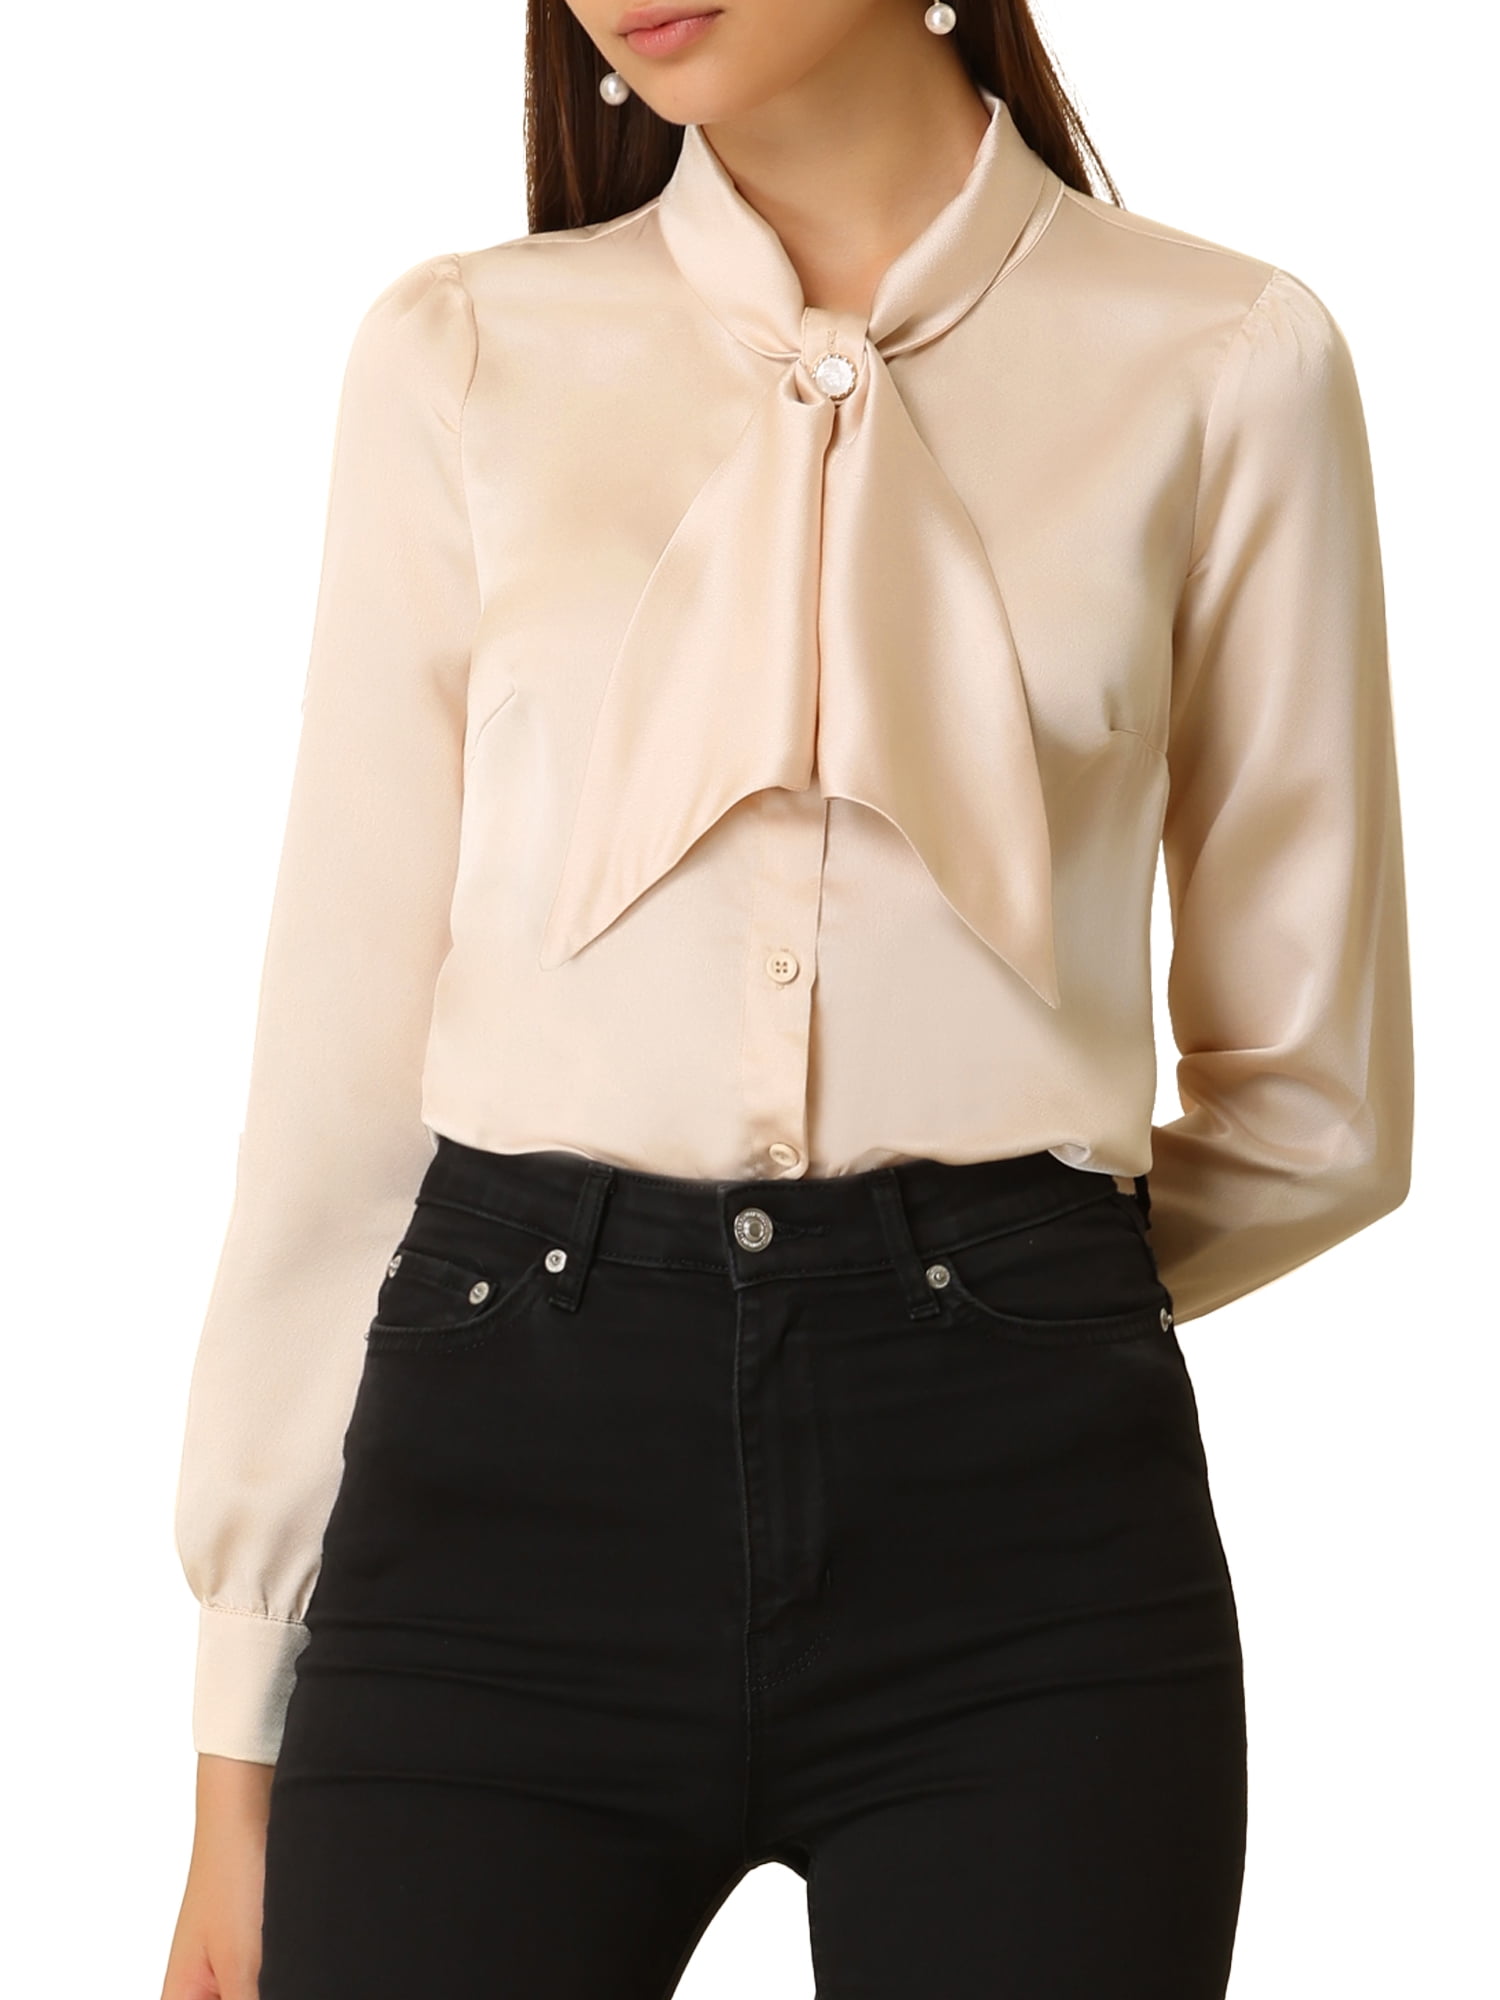 Elegant Women Embroidered Silk Satin Business Workwear Casual Tops Blouse Shirts